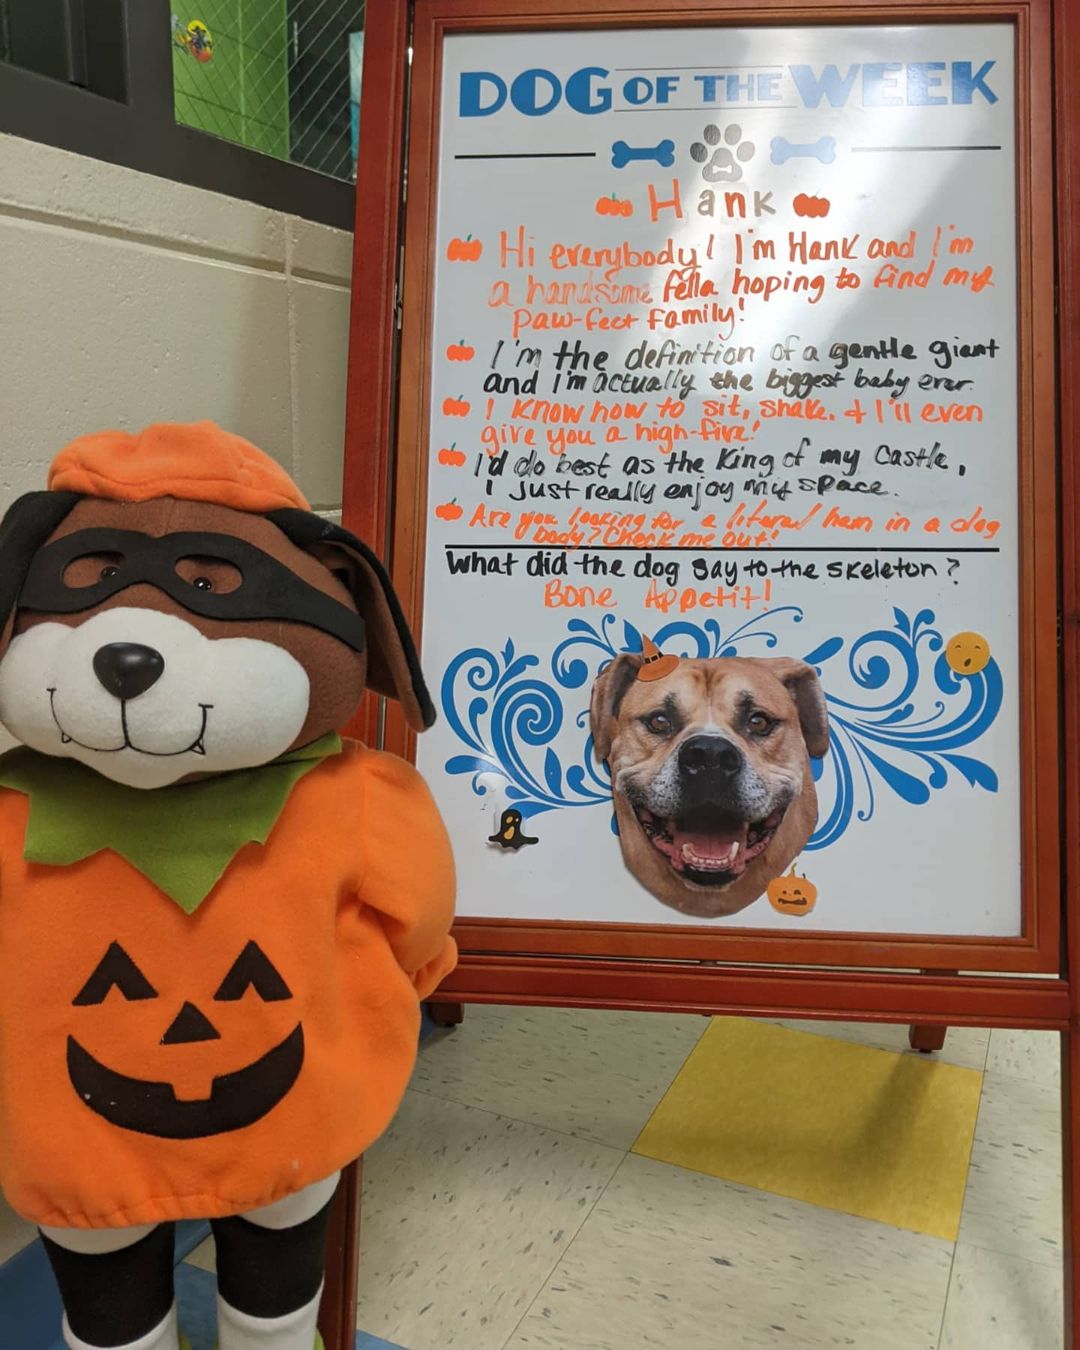 Hello Animal AND Halloween lovers! It's September 1st which means we're getting into the Halloween spirit around the shelter. Not only do we have some cute, spooky decorations up, we also decorated our Pet of the Week boards and we have some absolutely adorable retail. Our retail includes some really neat pet costumes, some to-die-for collars and leashes, and an assortment of toys your pets will go crazy for! Some say we might be getting into the Halloween spirit a little too early, but it's never too early for us around here. If you need some help getting excited for fall and all the spooks that come with it or maybe you want to visit with one of our very cool pets that are featured on our Pet of the Week boards - Come visit us! We'd love to help get your and your pets ready for one of the best times of the year - Halloween! 

<a target='_blank' href='https://www.instagram.com/explore/tags/halloweenseasonisuponus/'>#halloweenseasonisuponus</a> <a target='_blank' href='https://www.instagram.com/explore/tags/adoptdontshop/'>#adoptdontshop</a>🐾 <a target='_blank' href='https://www.instagram.com/explore/tags/siouxcityadopts/'>#siouxcityadopts</a> <a target='_blank' href='https://www.instagram.com/explore/tags/siouxlandhumanesociety/'>#siouxlandhumanesociety</a> <a target='_blank' href='https://www.instagram.com/explore/tags/fallisintheair/'>#fallisintheair</a>